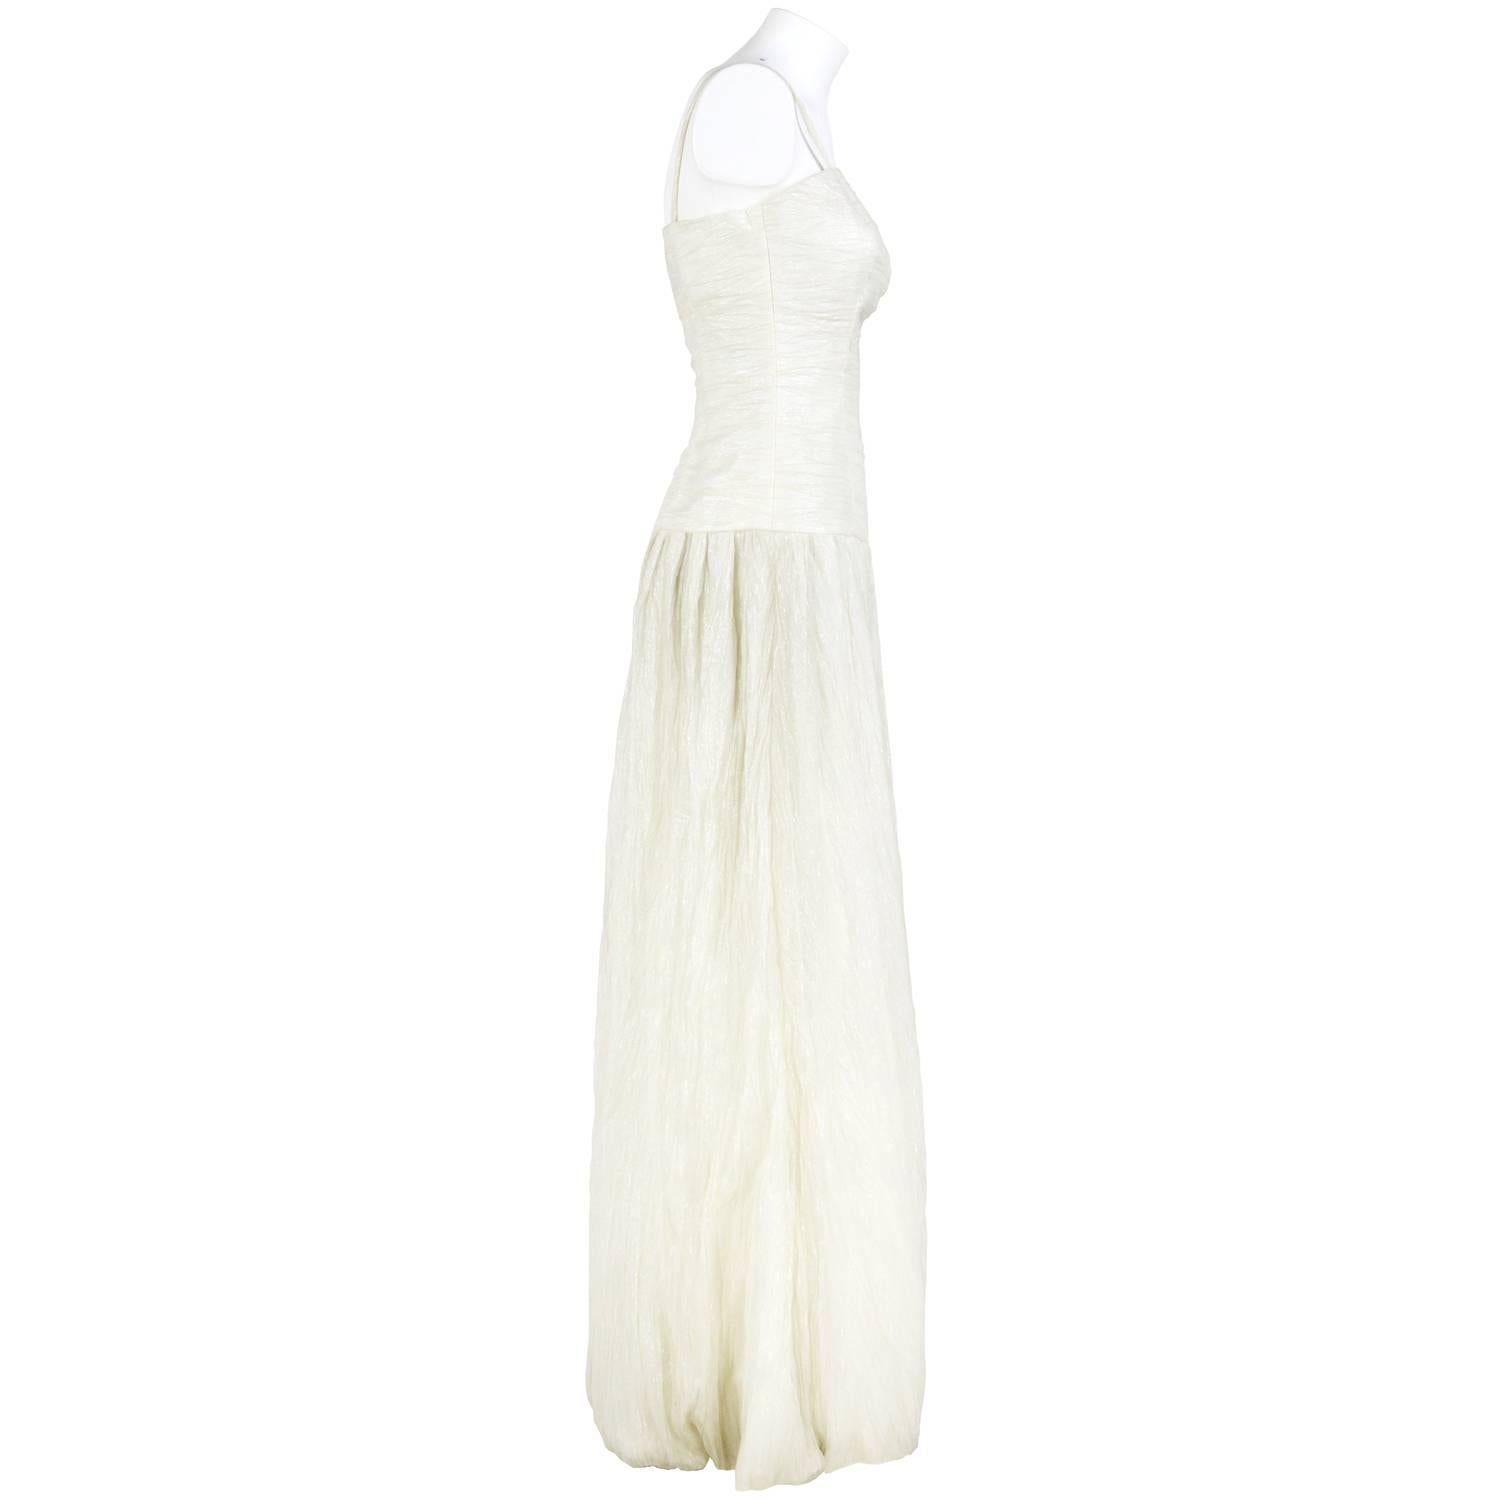 A.N.G.E.L.O. Vintage - Italy

Beautiful Douglas wedding dress in cream color with thin straps and wide skirt lightly pleated. The item was produced in the 2000s and is in excellent conditions.

Height: 150 cm
Bust: 38 cm
Waist: 32 cm